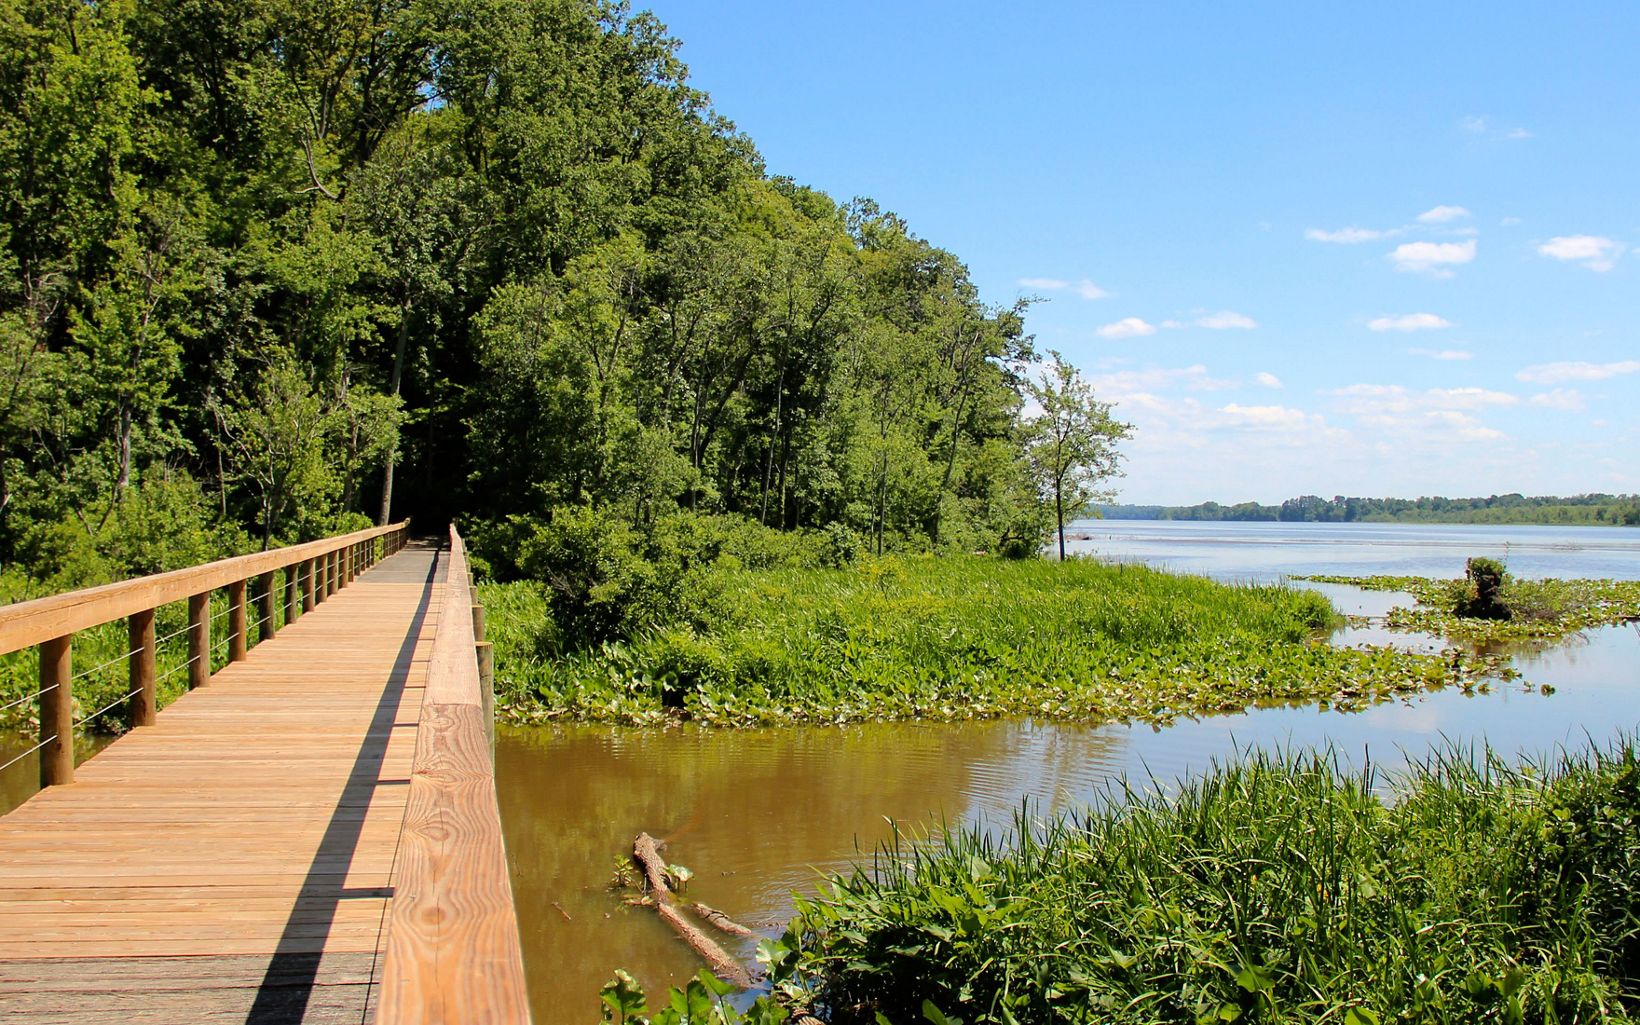 A wooden footbridge extends over open water and wetlands. The main branch of a river is visible in the background with a distant forest along the edges of the river bank.